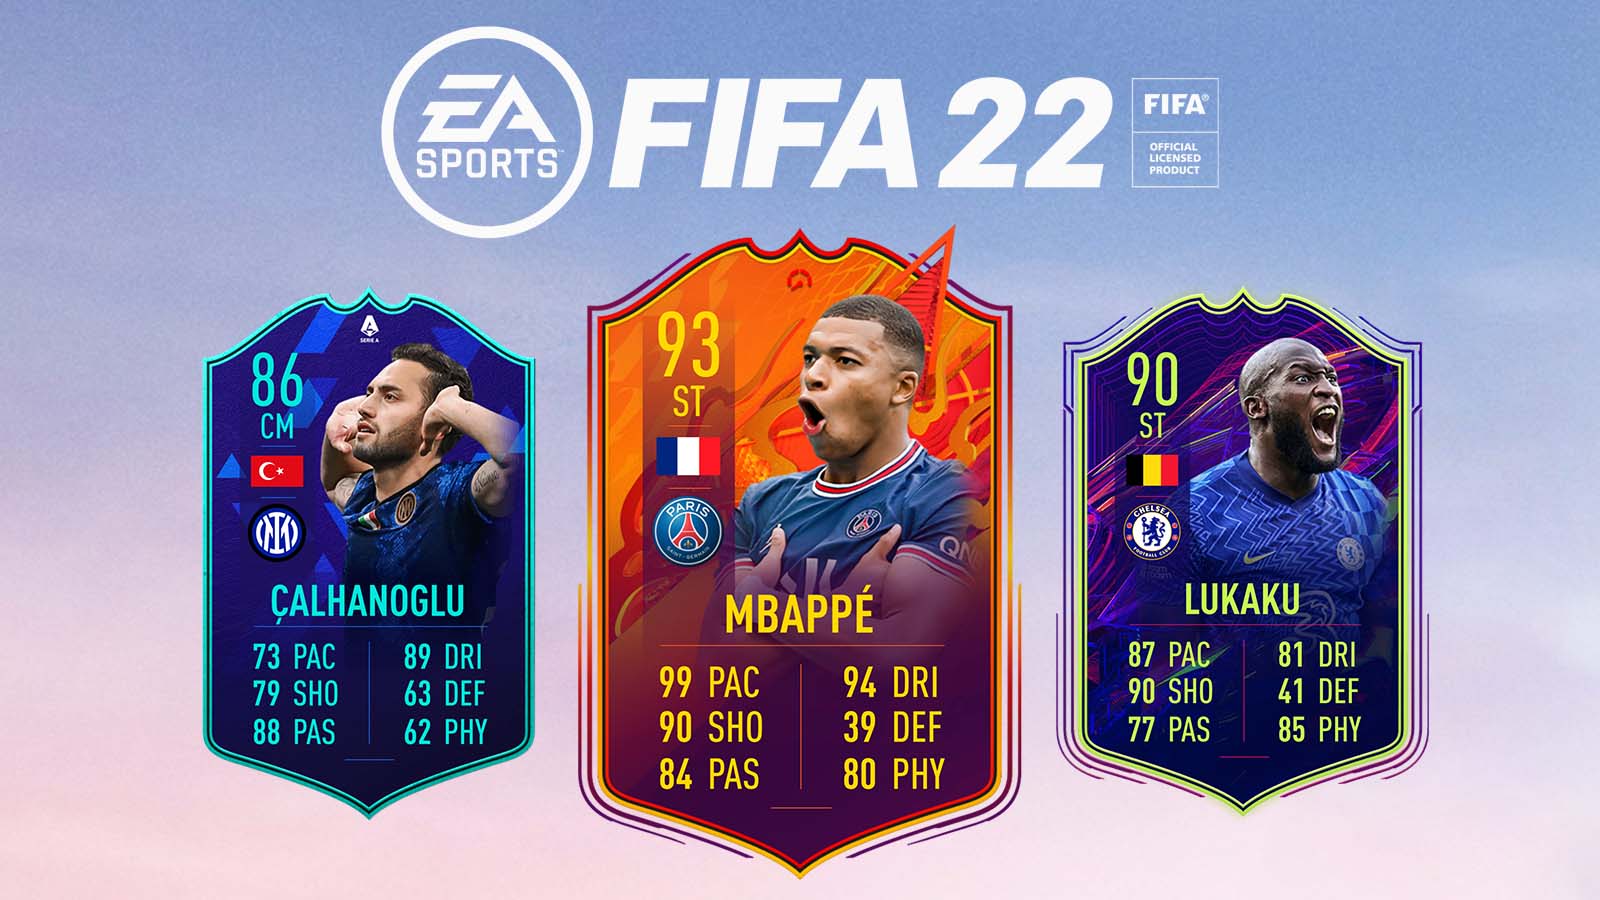 FIFA 22 performance-based cards